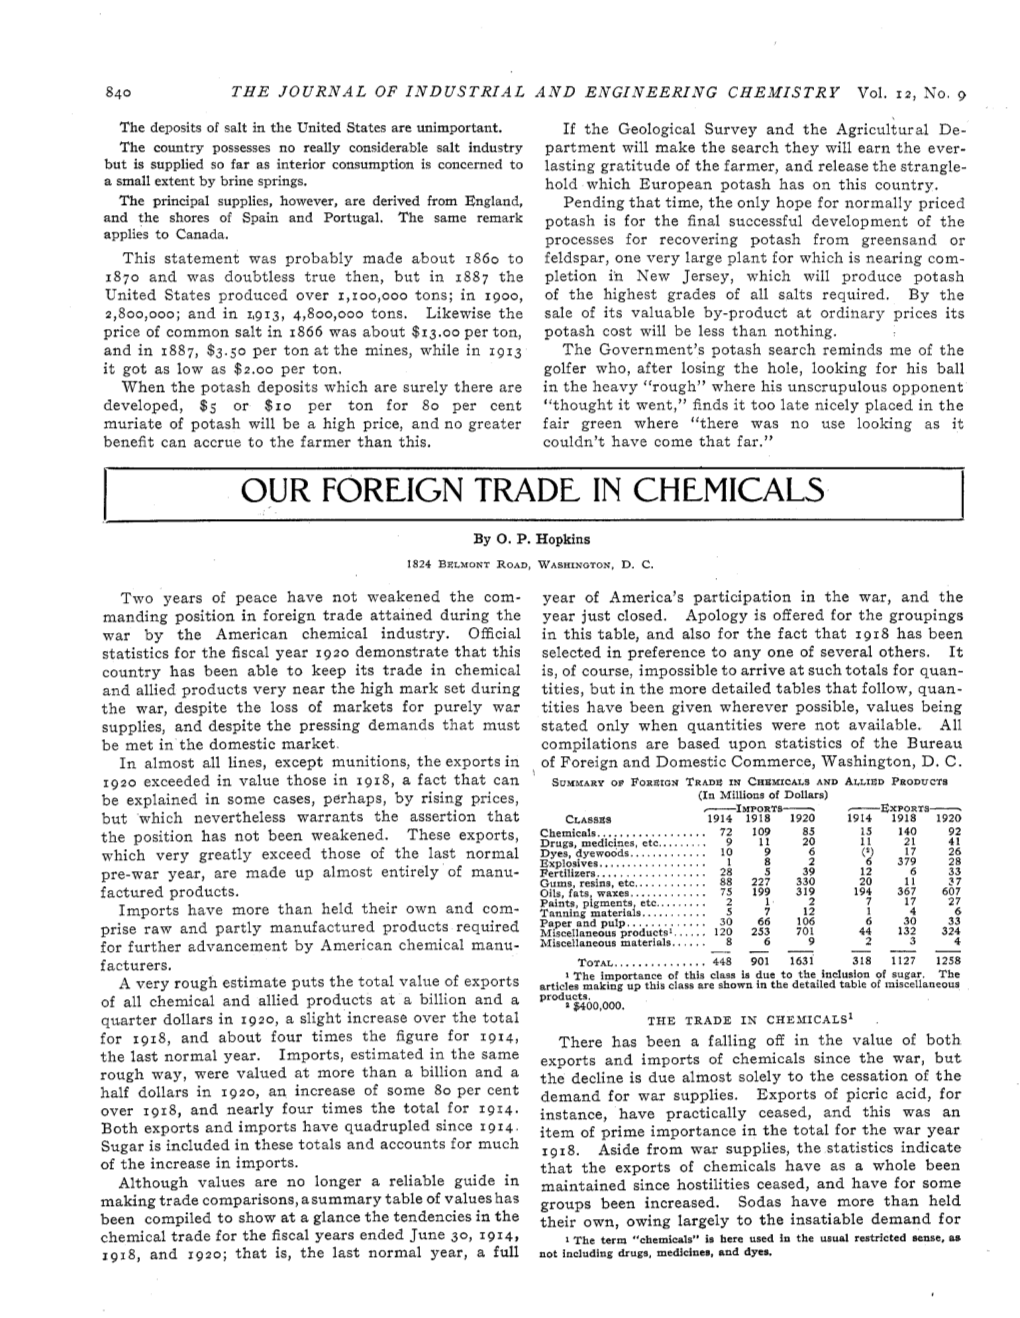 Our Foreign Trade in Chemicals